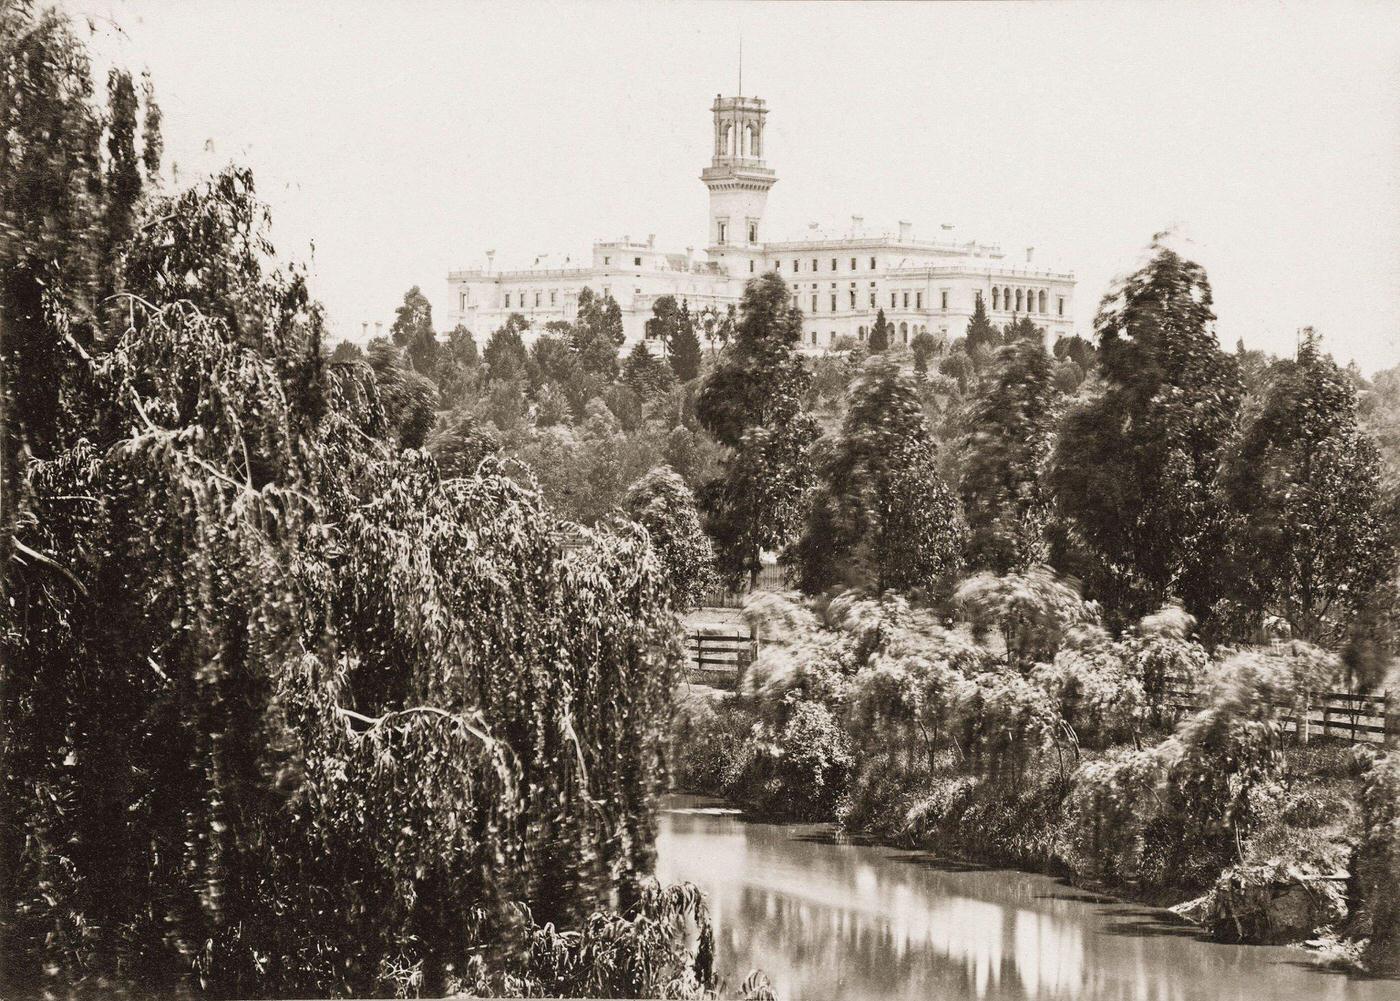 Governors Palace, 1885